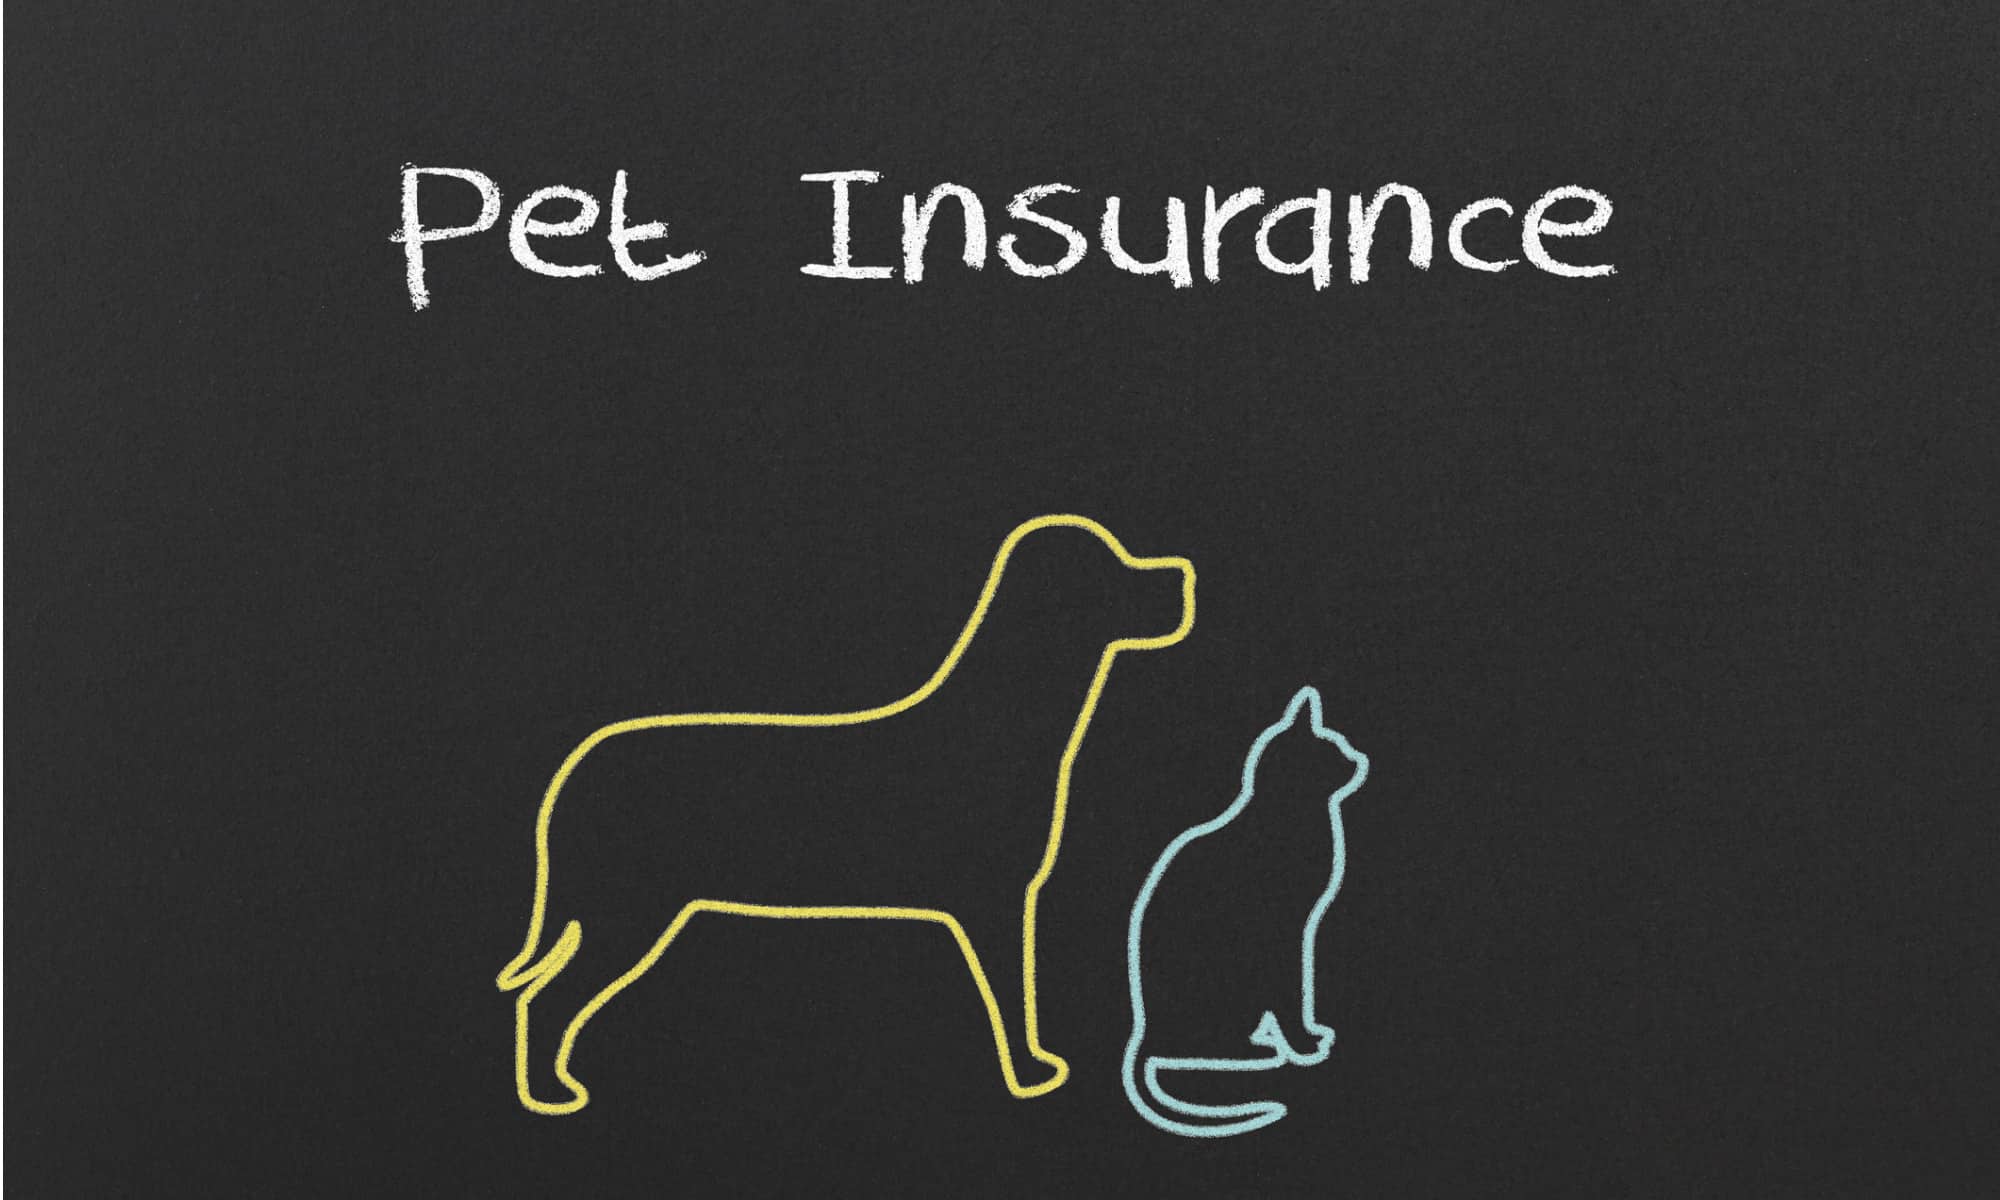 An illustrated blackboard with chalk outlines of a cat and a dog and the heading Pet Insurance